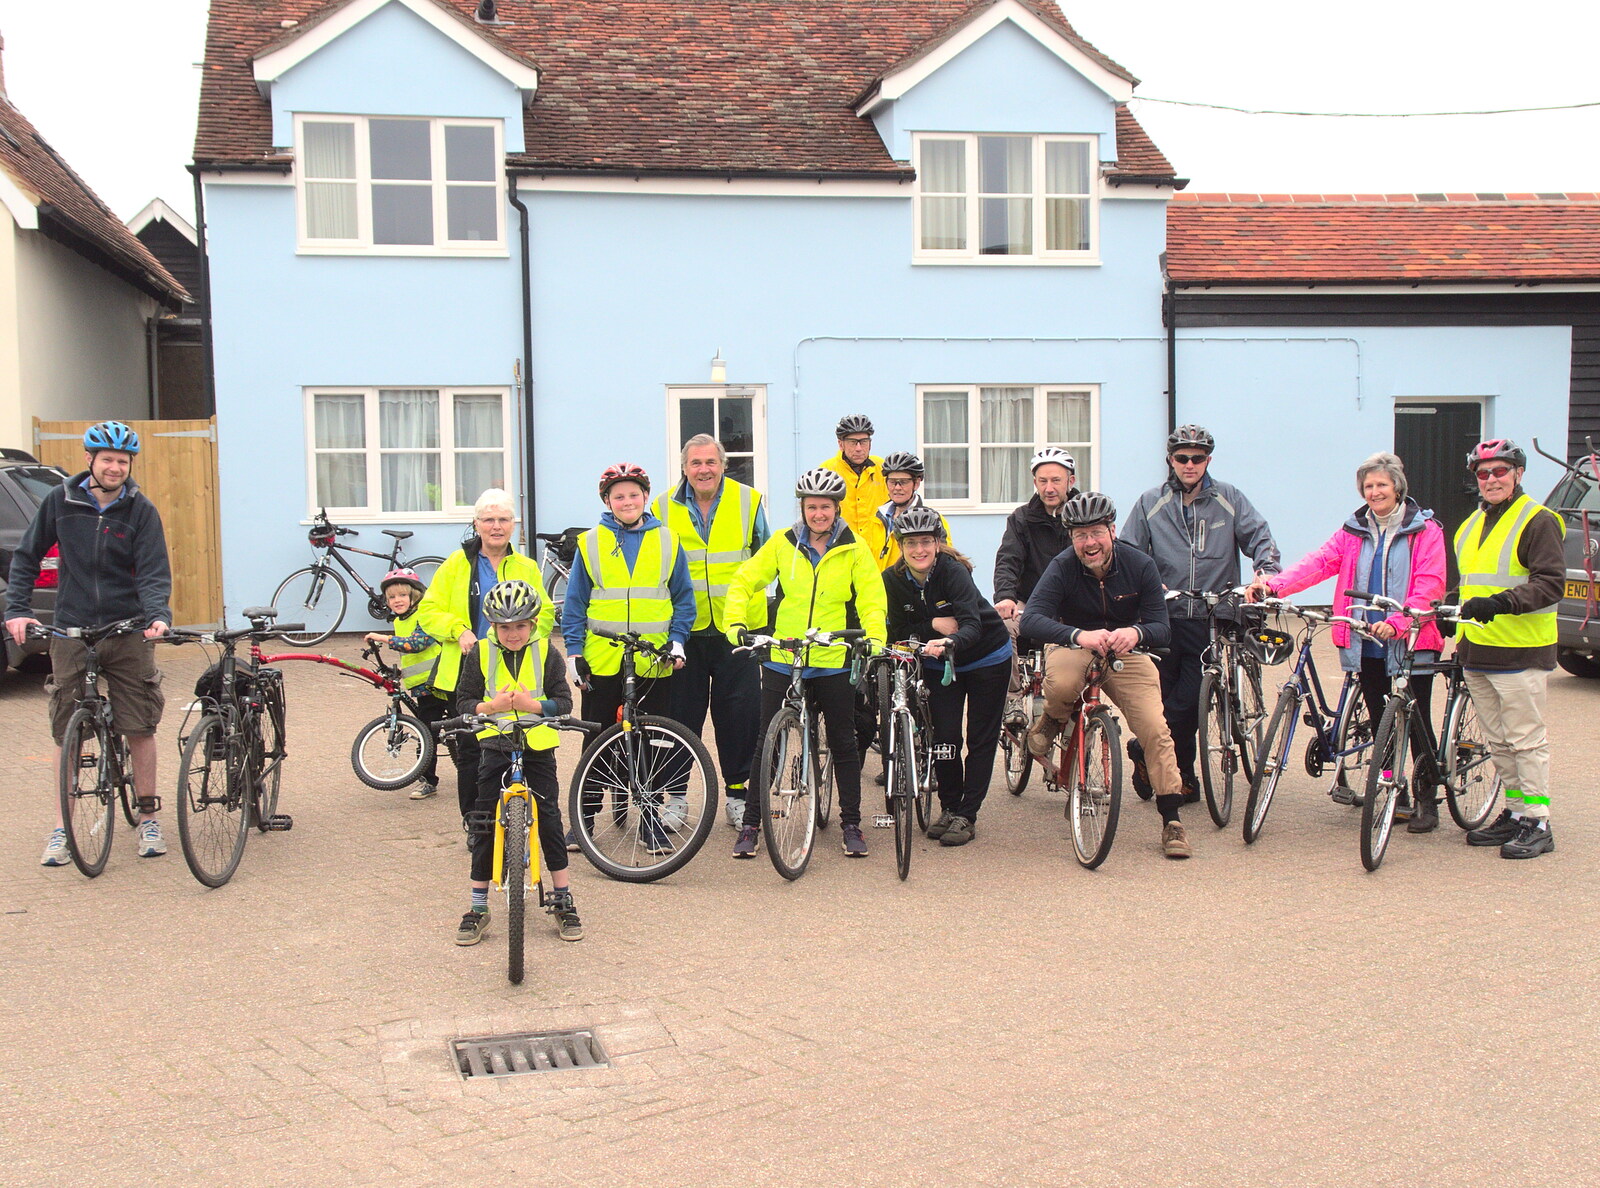 Bike club photo from The Last-Ever BSCC Weekend Away Bike Ride, Thaxted, Essex - 6th May 2017